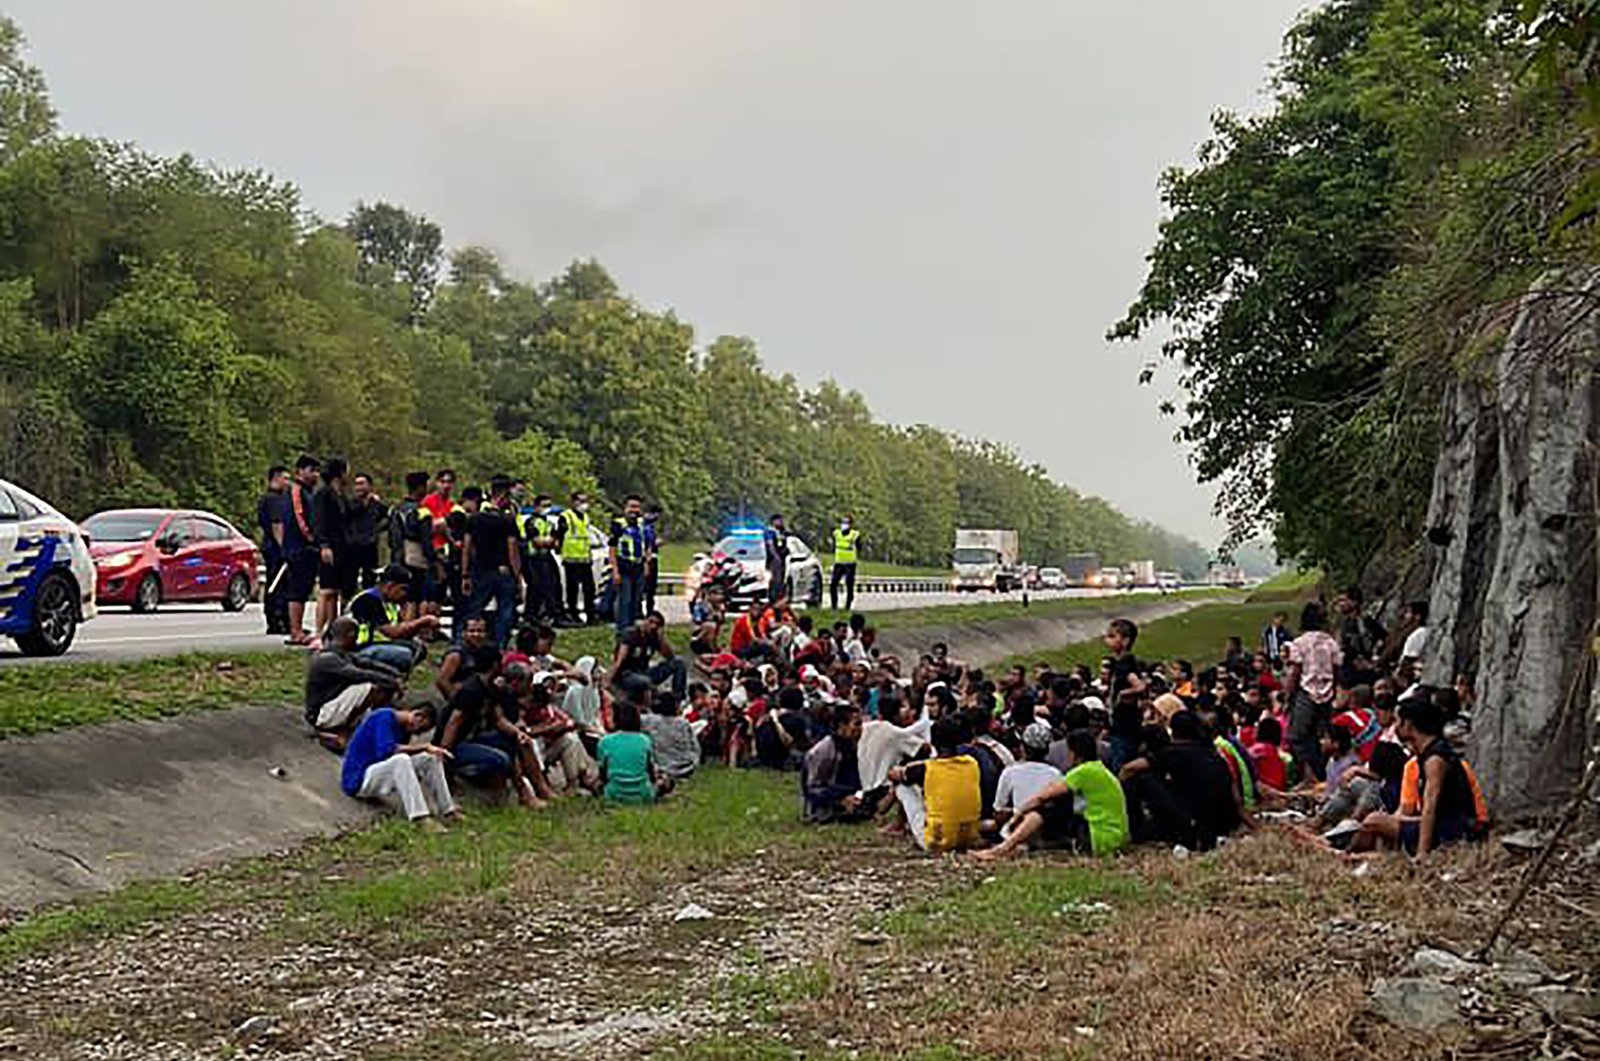 Police detain Rohingya refugees who had escaped from the Sungai Bakap Temporary Immigration Depot, Penang, Malaysia, April 20, 2022. (AP Photo)